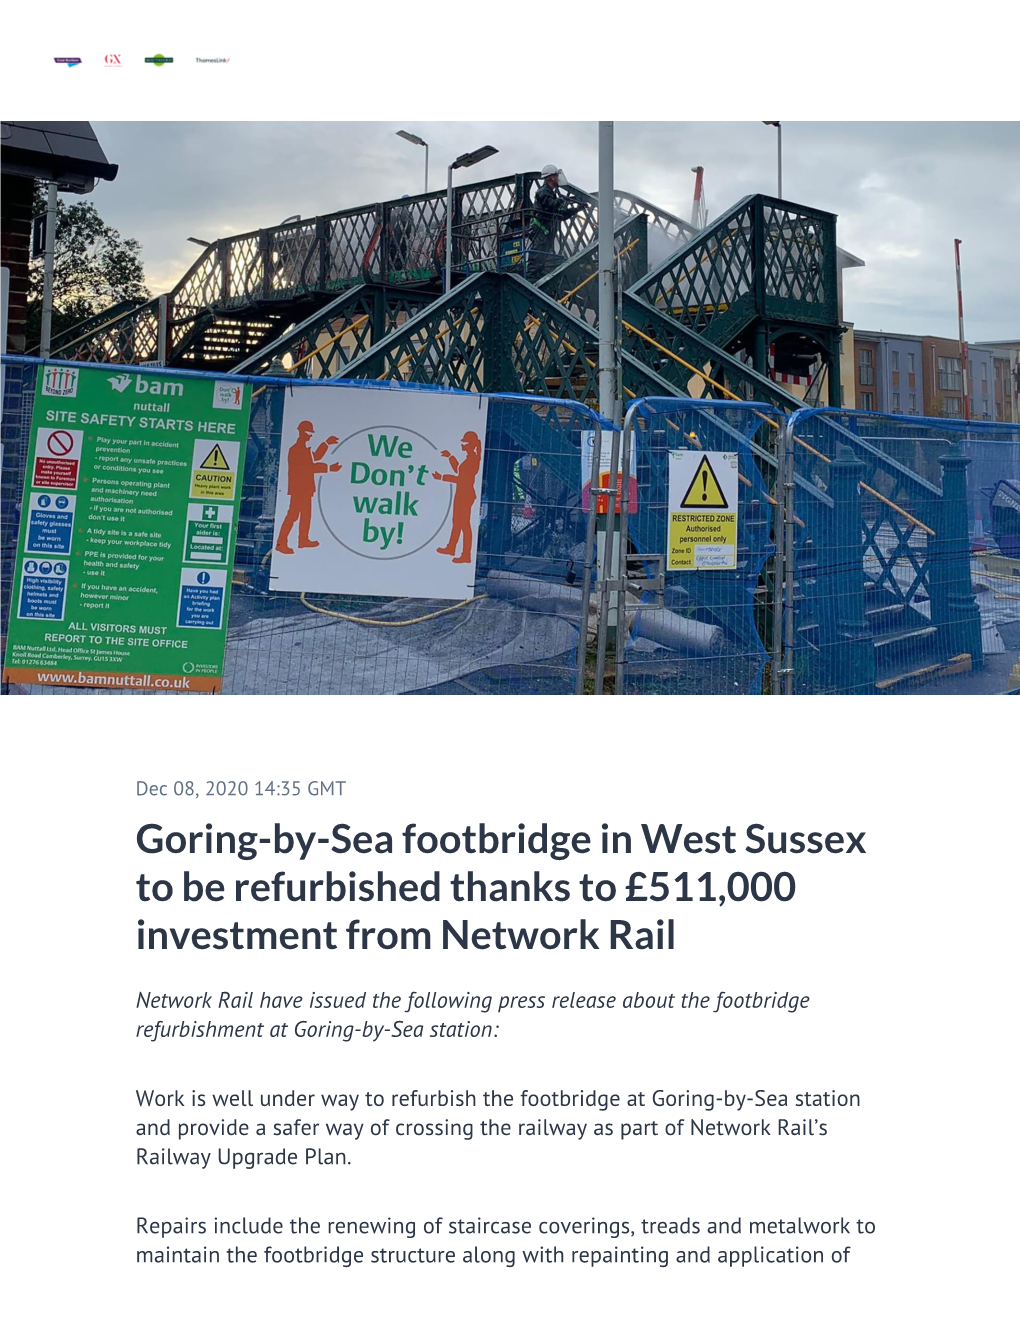 Goring-By-Sea Footbridge in West Sussex to Be Refurbished Thanks to £511,000 Investment from Network Rail